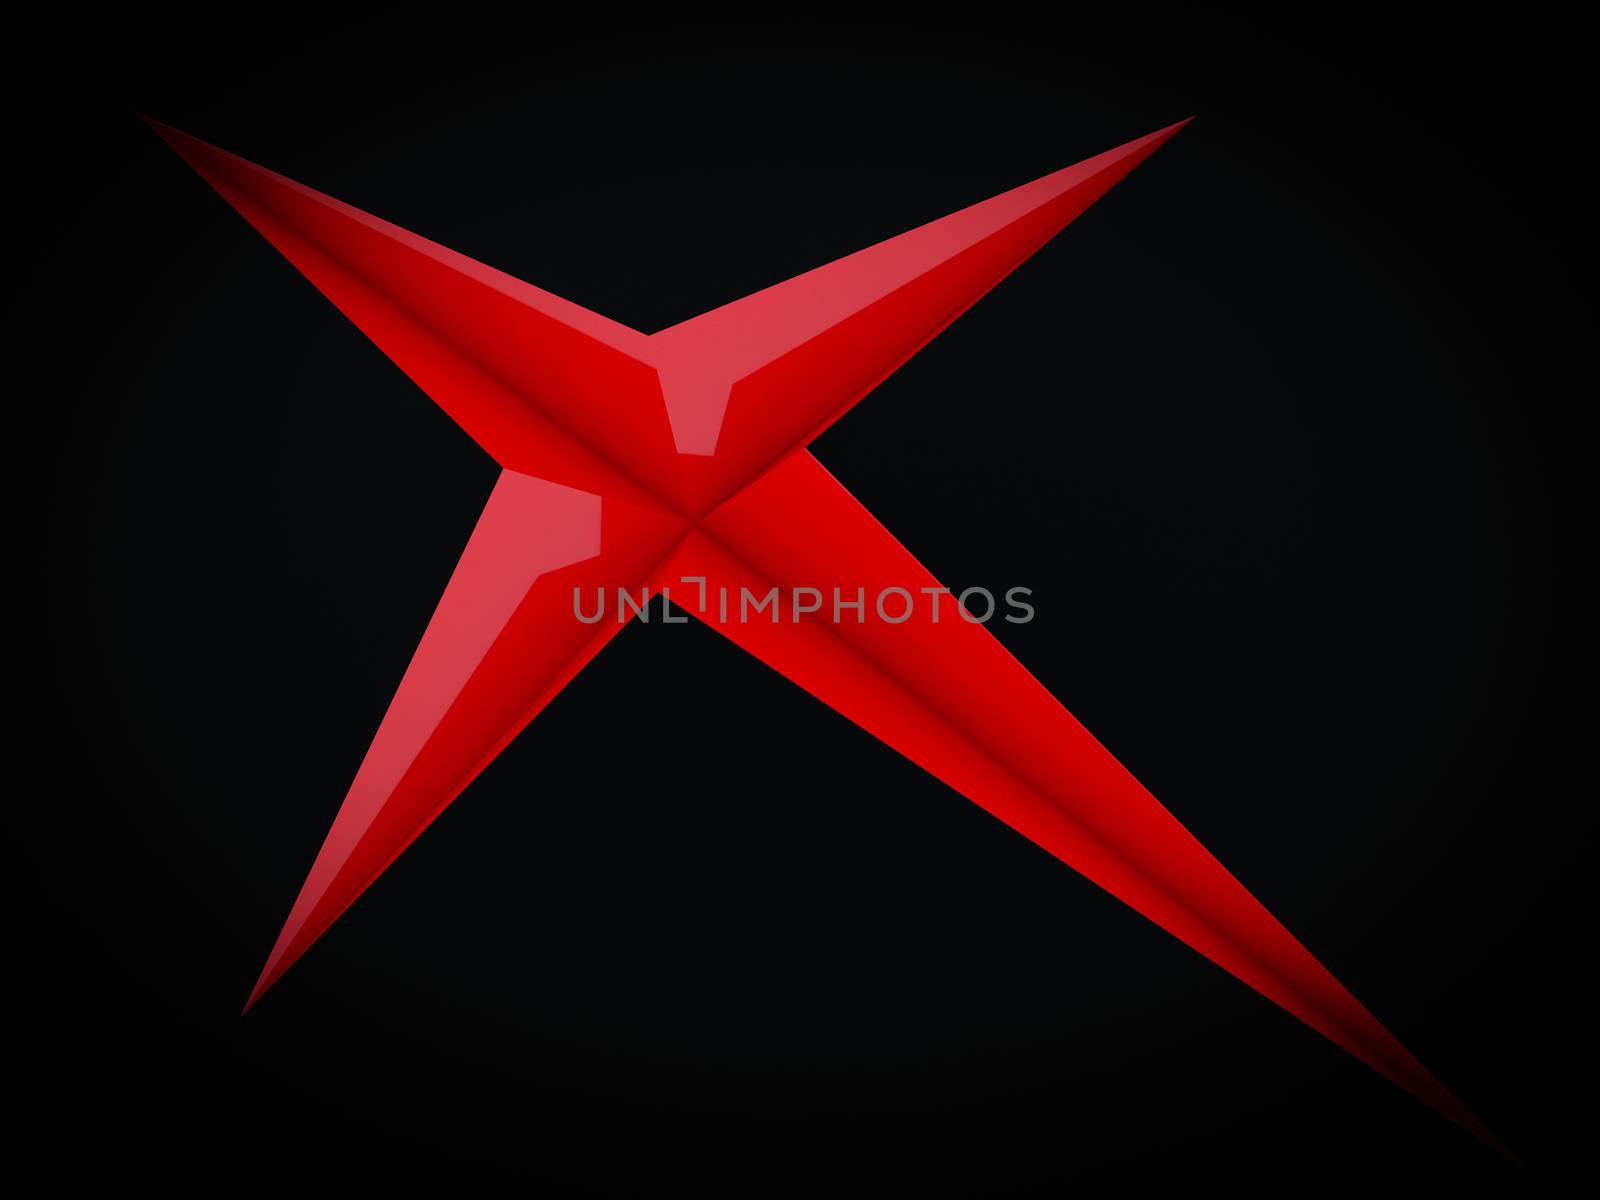 3D rendering of abstract modern abyss shape background  by chingraph